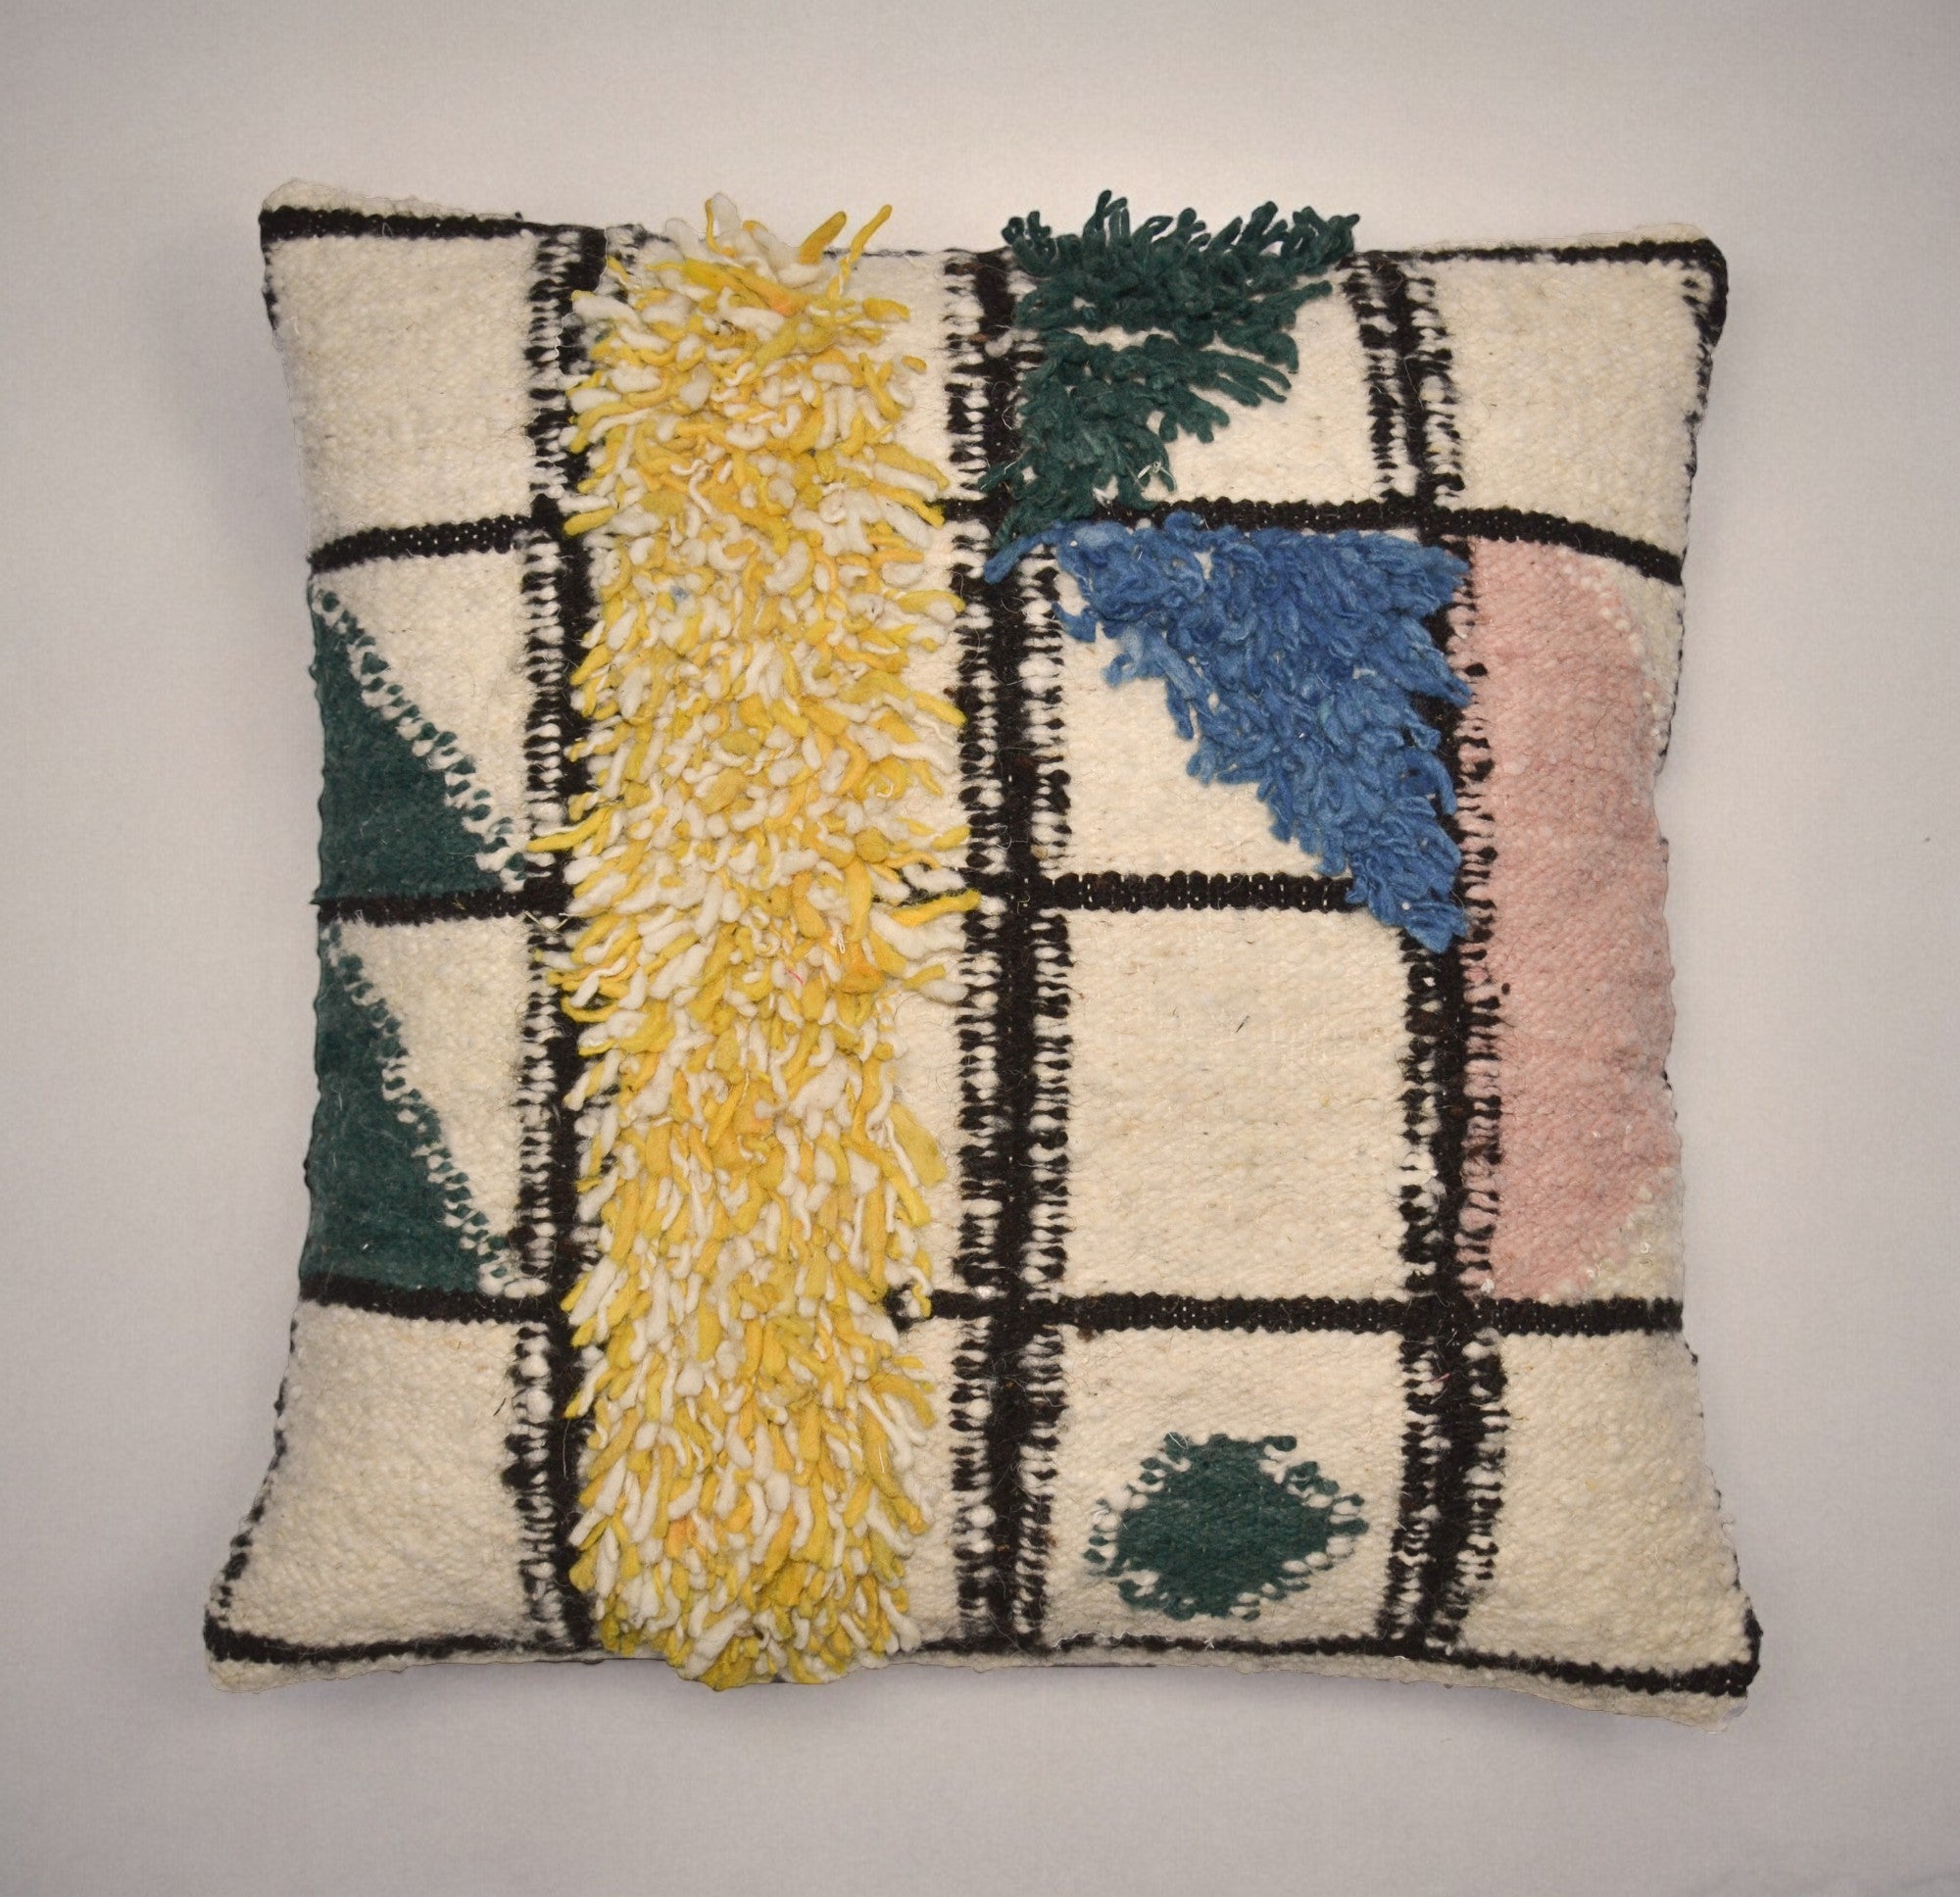 Grid Wool Pillow Covers by Diego Olivero Studio